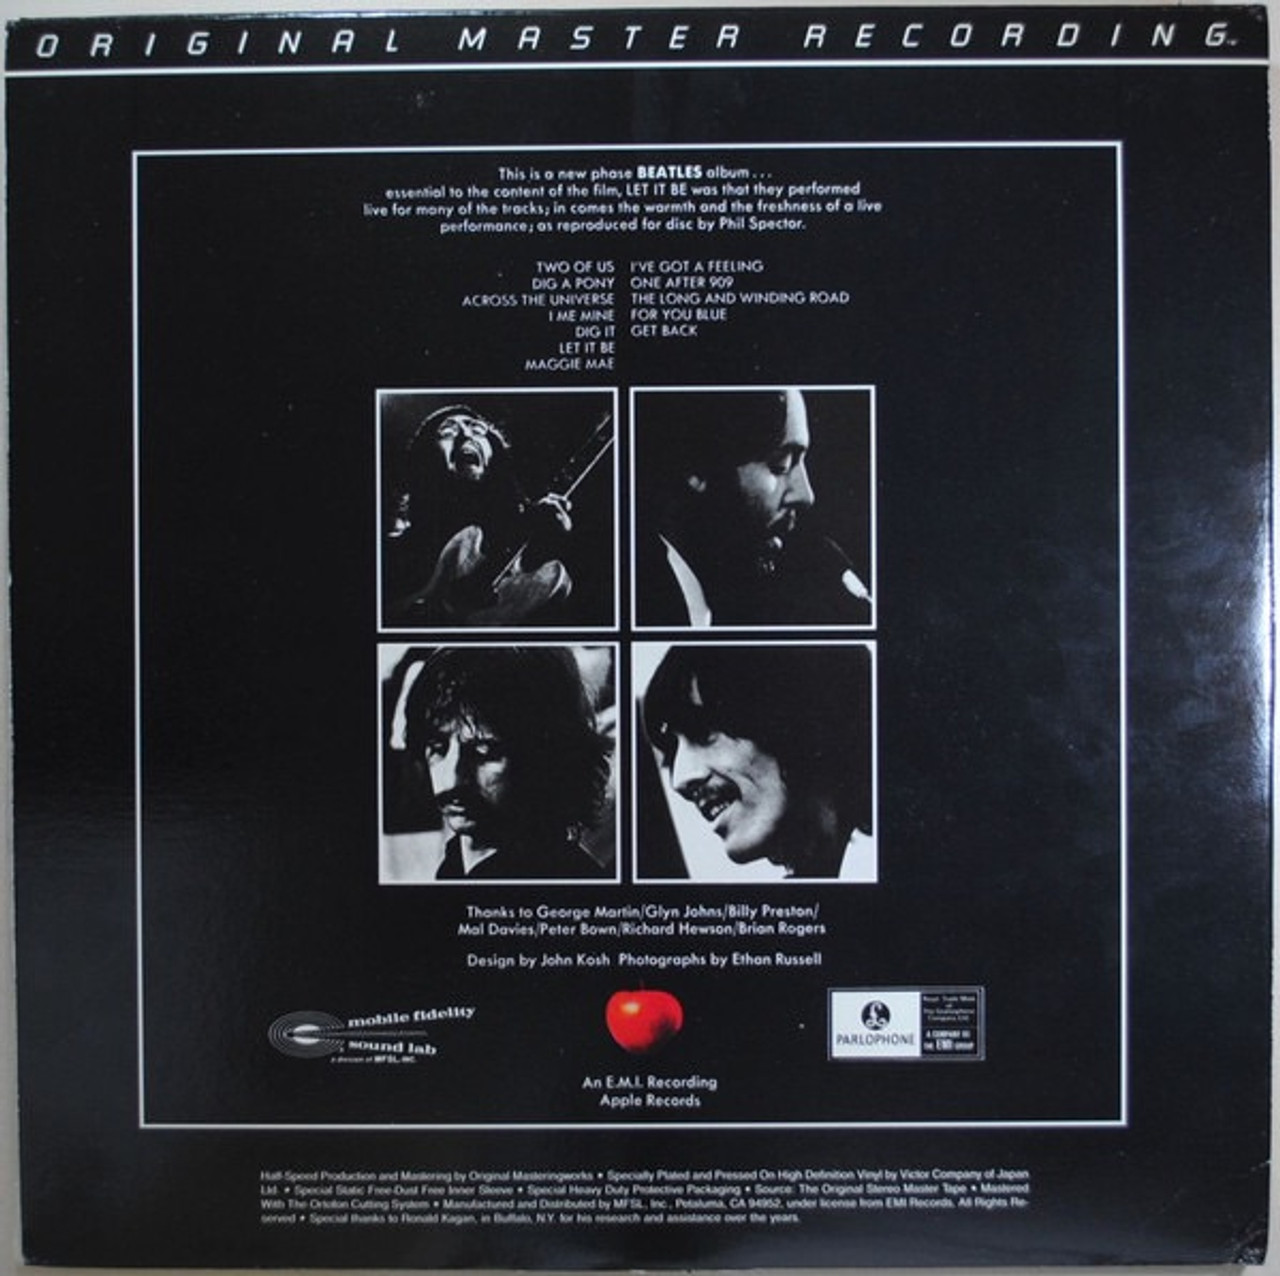 The Beatles - Let It Be (1986 MFSL NM Vinyl) - The Record Centre